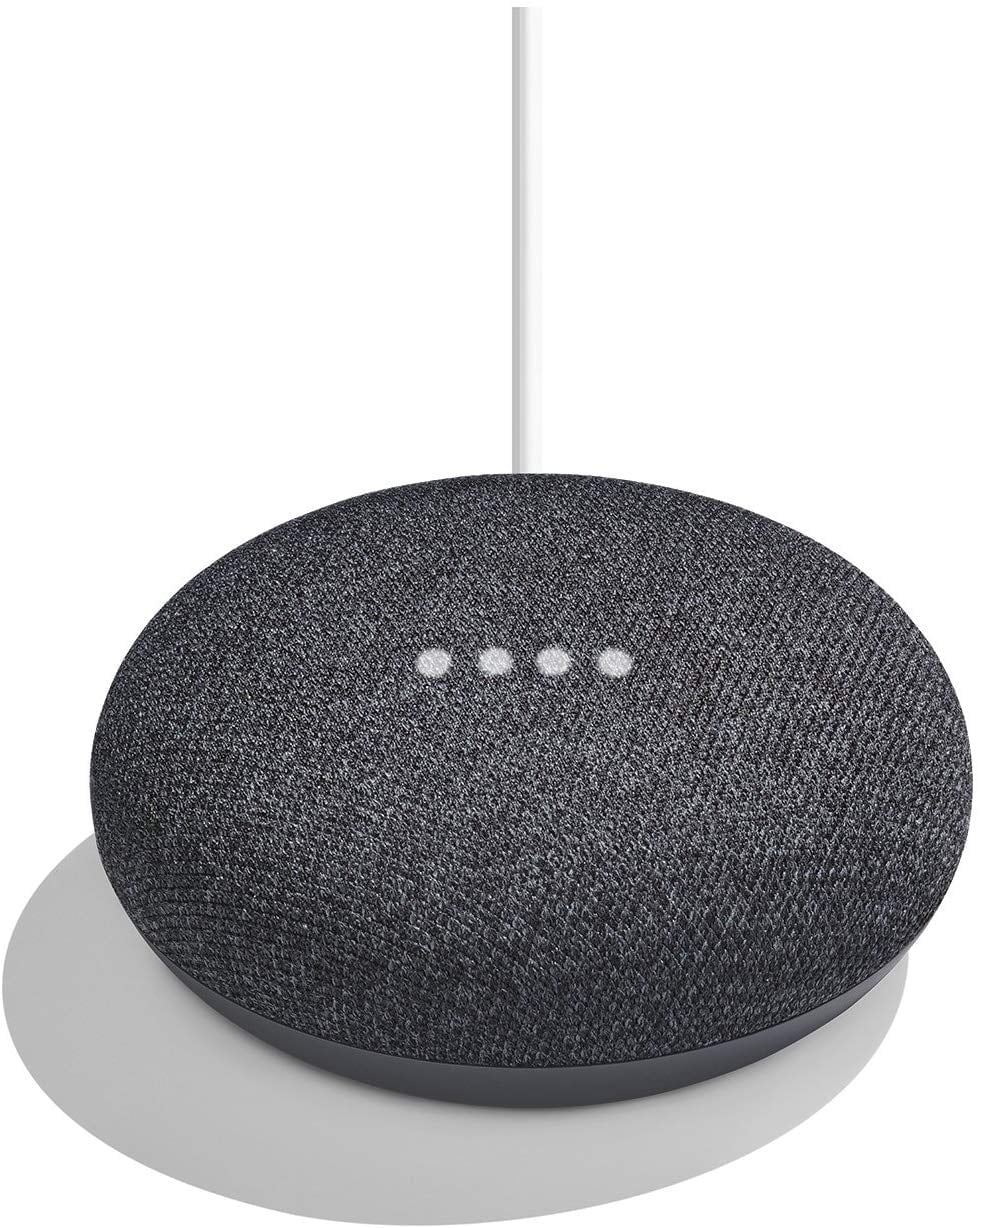 Google The Google Home Mini Wireless Speaker Serves As The Hub Of Home Automation Since It Gets Your Most Important Tasks Done With A Mere Voice Command. This Speaker Is Equipped With The Far-Field Voice Recognition And Thus, Responds To Your Queries, Readies The Grocery List For You And Plays You Your Favorite Music As Well As Videos With The Wifi As Well As Bluetooth Connectivity Without You Lifting Even A Finger. &Amp;Lt;H3 Class=&Amp;Quot;Mqn-Ag3&Amp;Quot;&Amp;Gt;Control Your Smart Home With Your Voice.&Amp;Lt;/H3&Amp;Gt; &Amp;Lt;Div Class=&Amp;Quot;Mqn-Afp&Amp;Quot;&Amp;Gt;Google Home Mini Works With More Than 5,000 Smart Home Devices From More Than 150 Brands.&Amp;Lt;/Div&Amp;Gt; &Amp;Lt;Strong&Amp;Gt;Product Website:&Amp;Lt;/Strong&Amp;Gt; Https://Store.google.com/Us/Product/Google_Home_Mini?Hl=En-Us &Amp;Nbsp; &Amp;Nbsp; Google Home Mini Smart Speaker Charcoal Google Home Mini Smart Speaker Charcoal